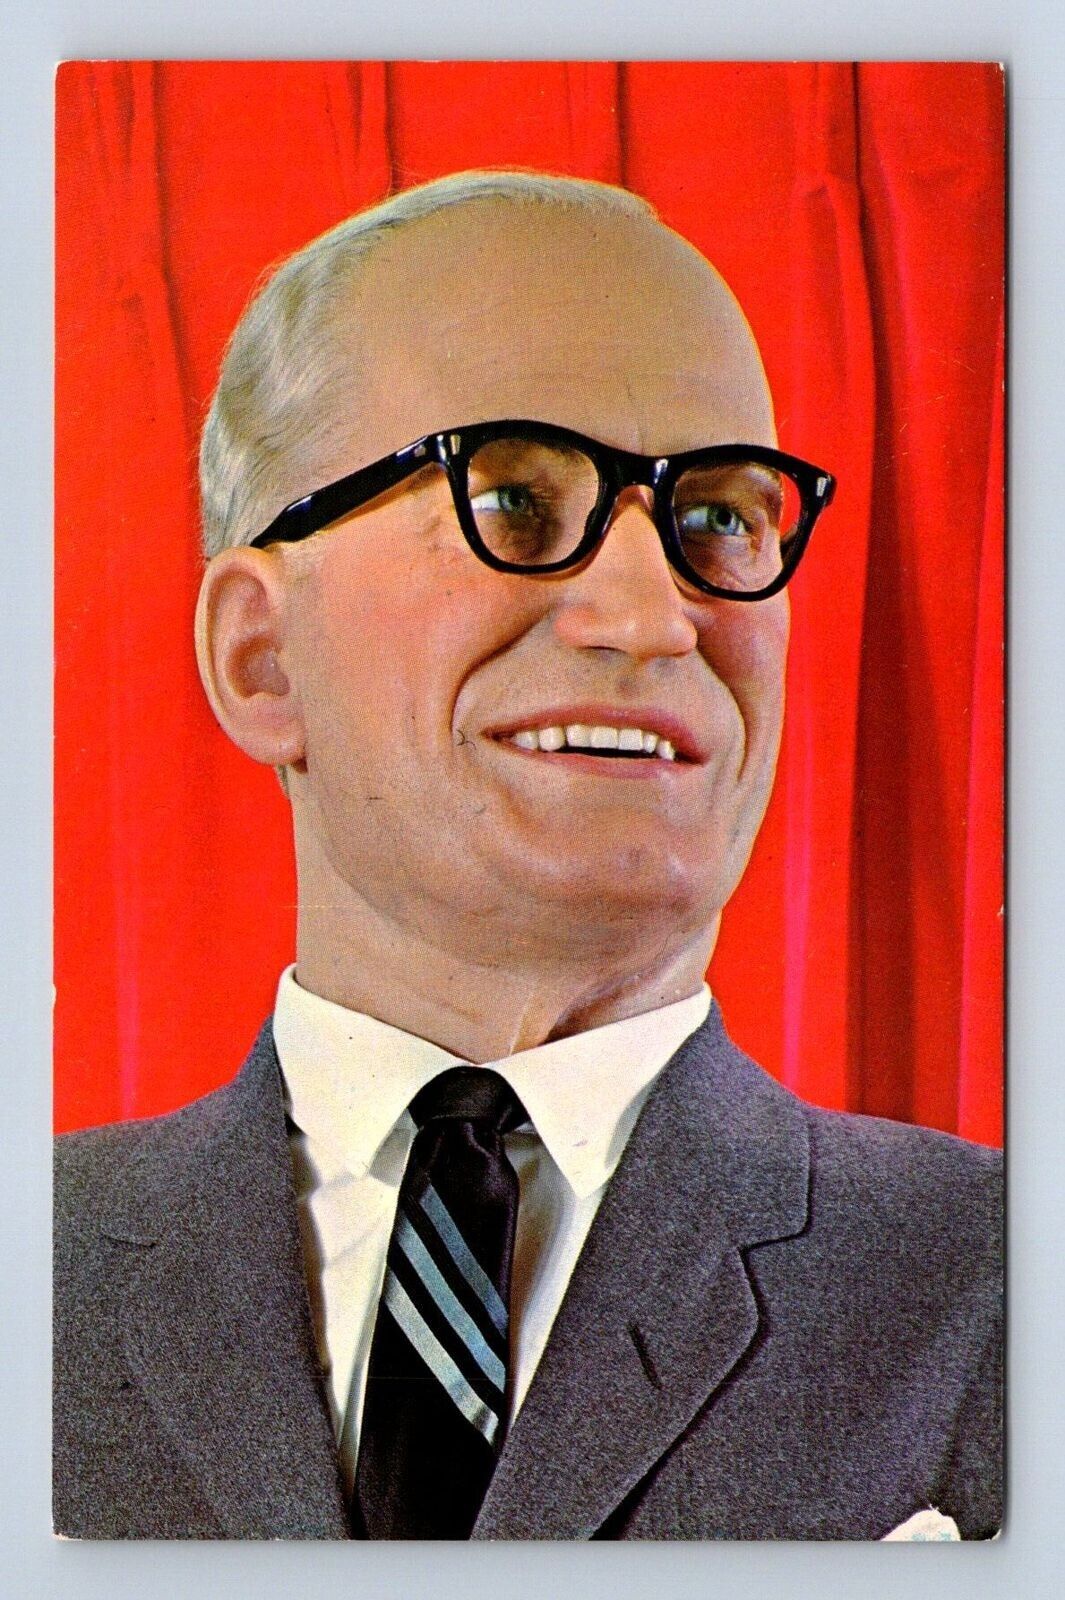 Barry M. Goldwater Wax Figure 1964 Republican Pres. Candidate Postcard Unposted